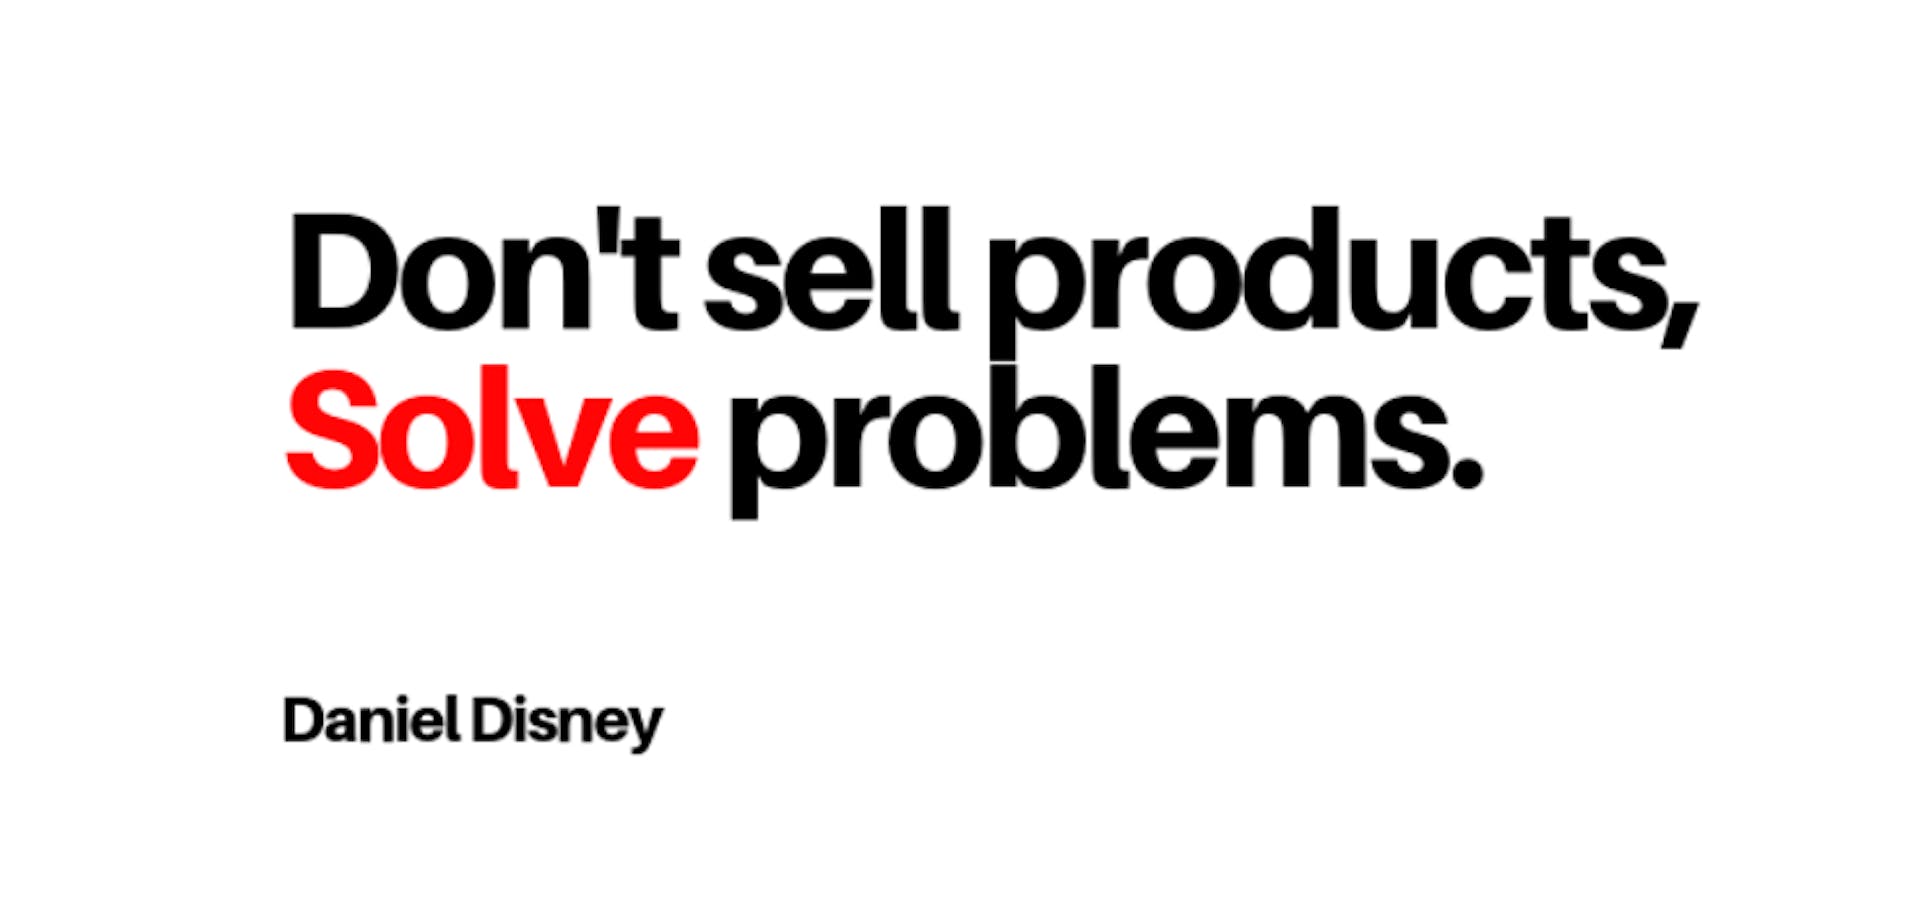 Image showing Daniel Disney's quote "Don't sell products, solve problems.